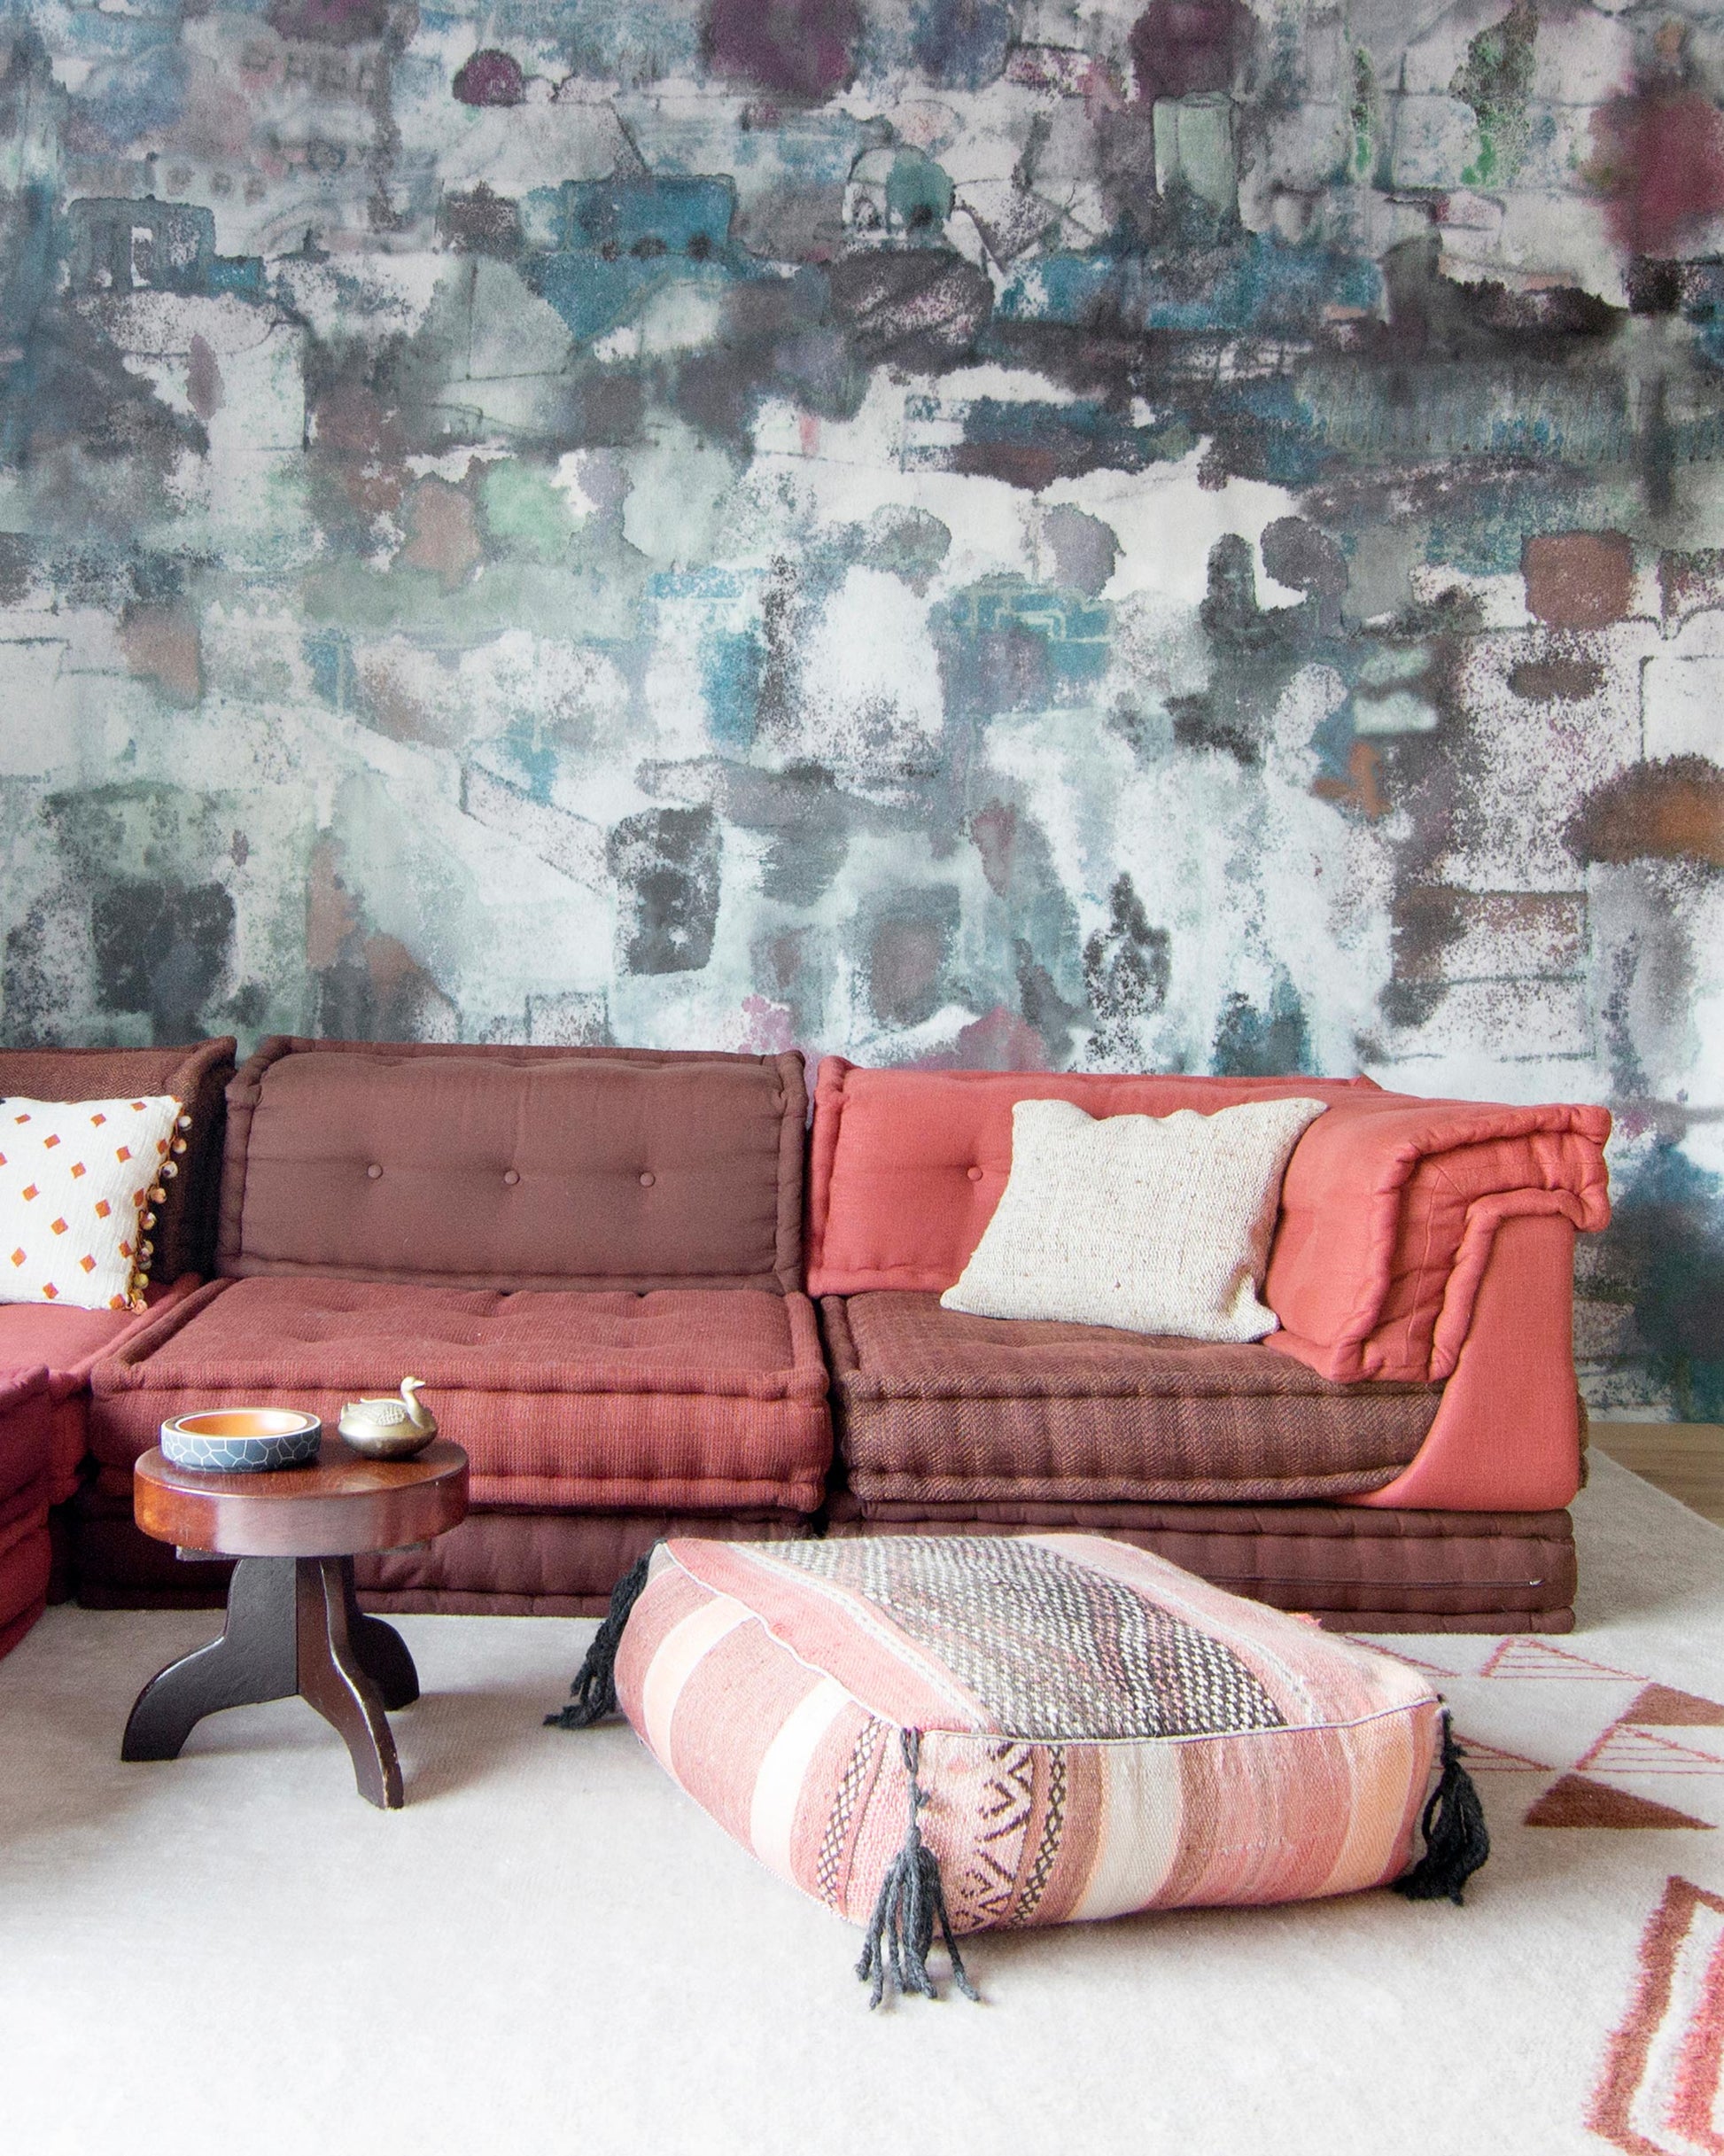 A living room with a colorful mural on the Kotoubia Wallpaper Mural Tesoro wall in Morocco